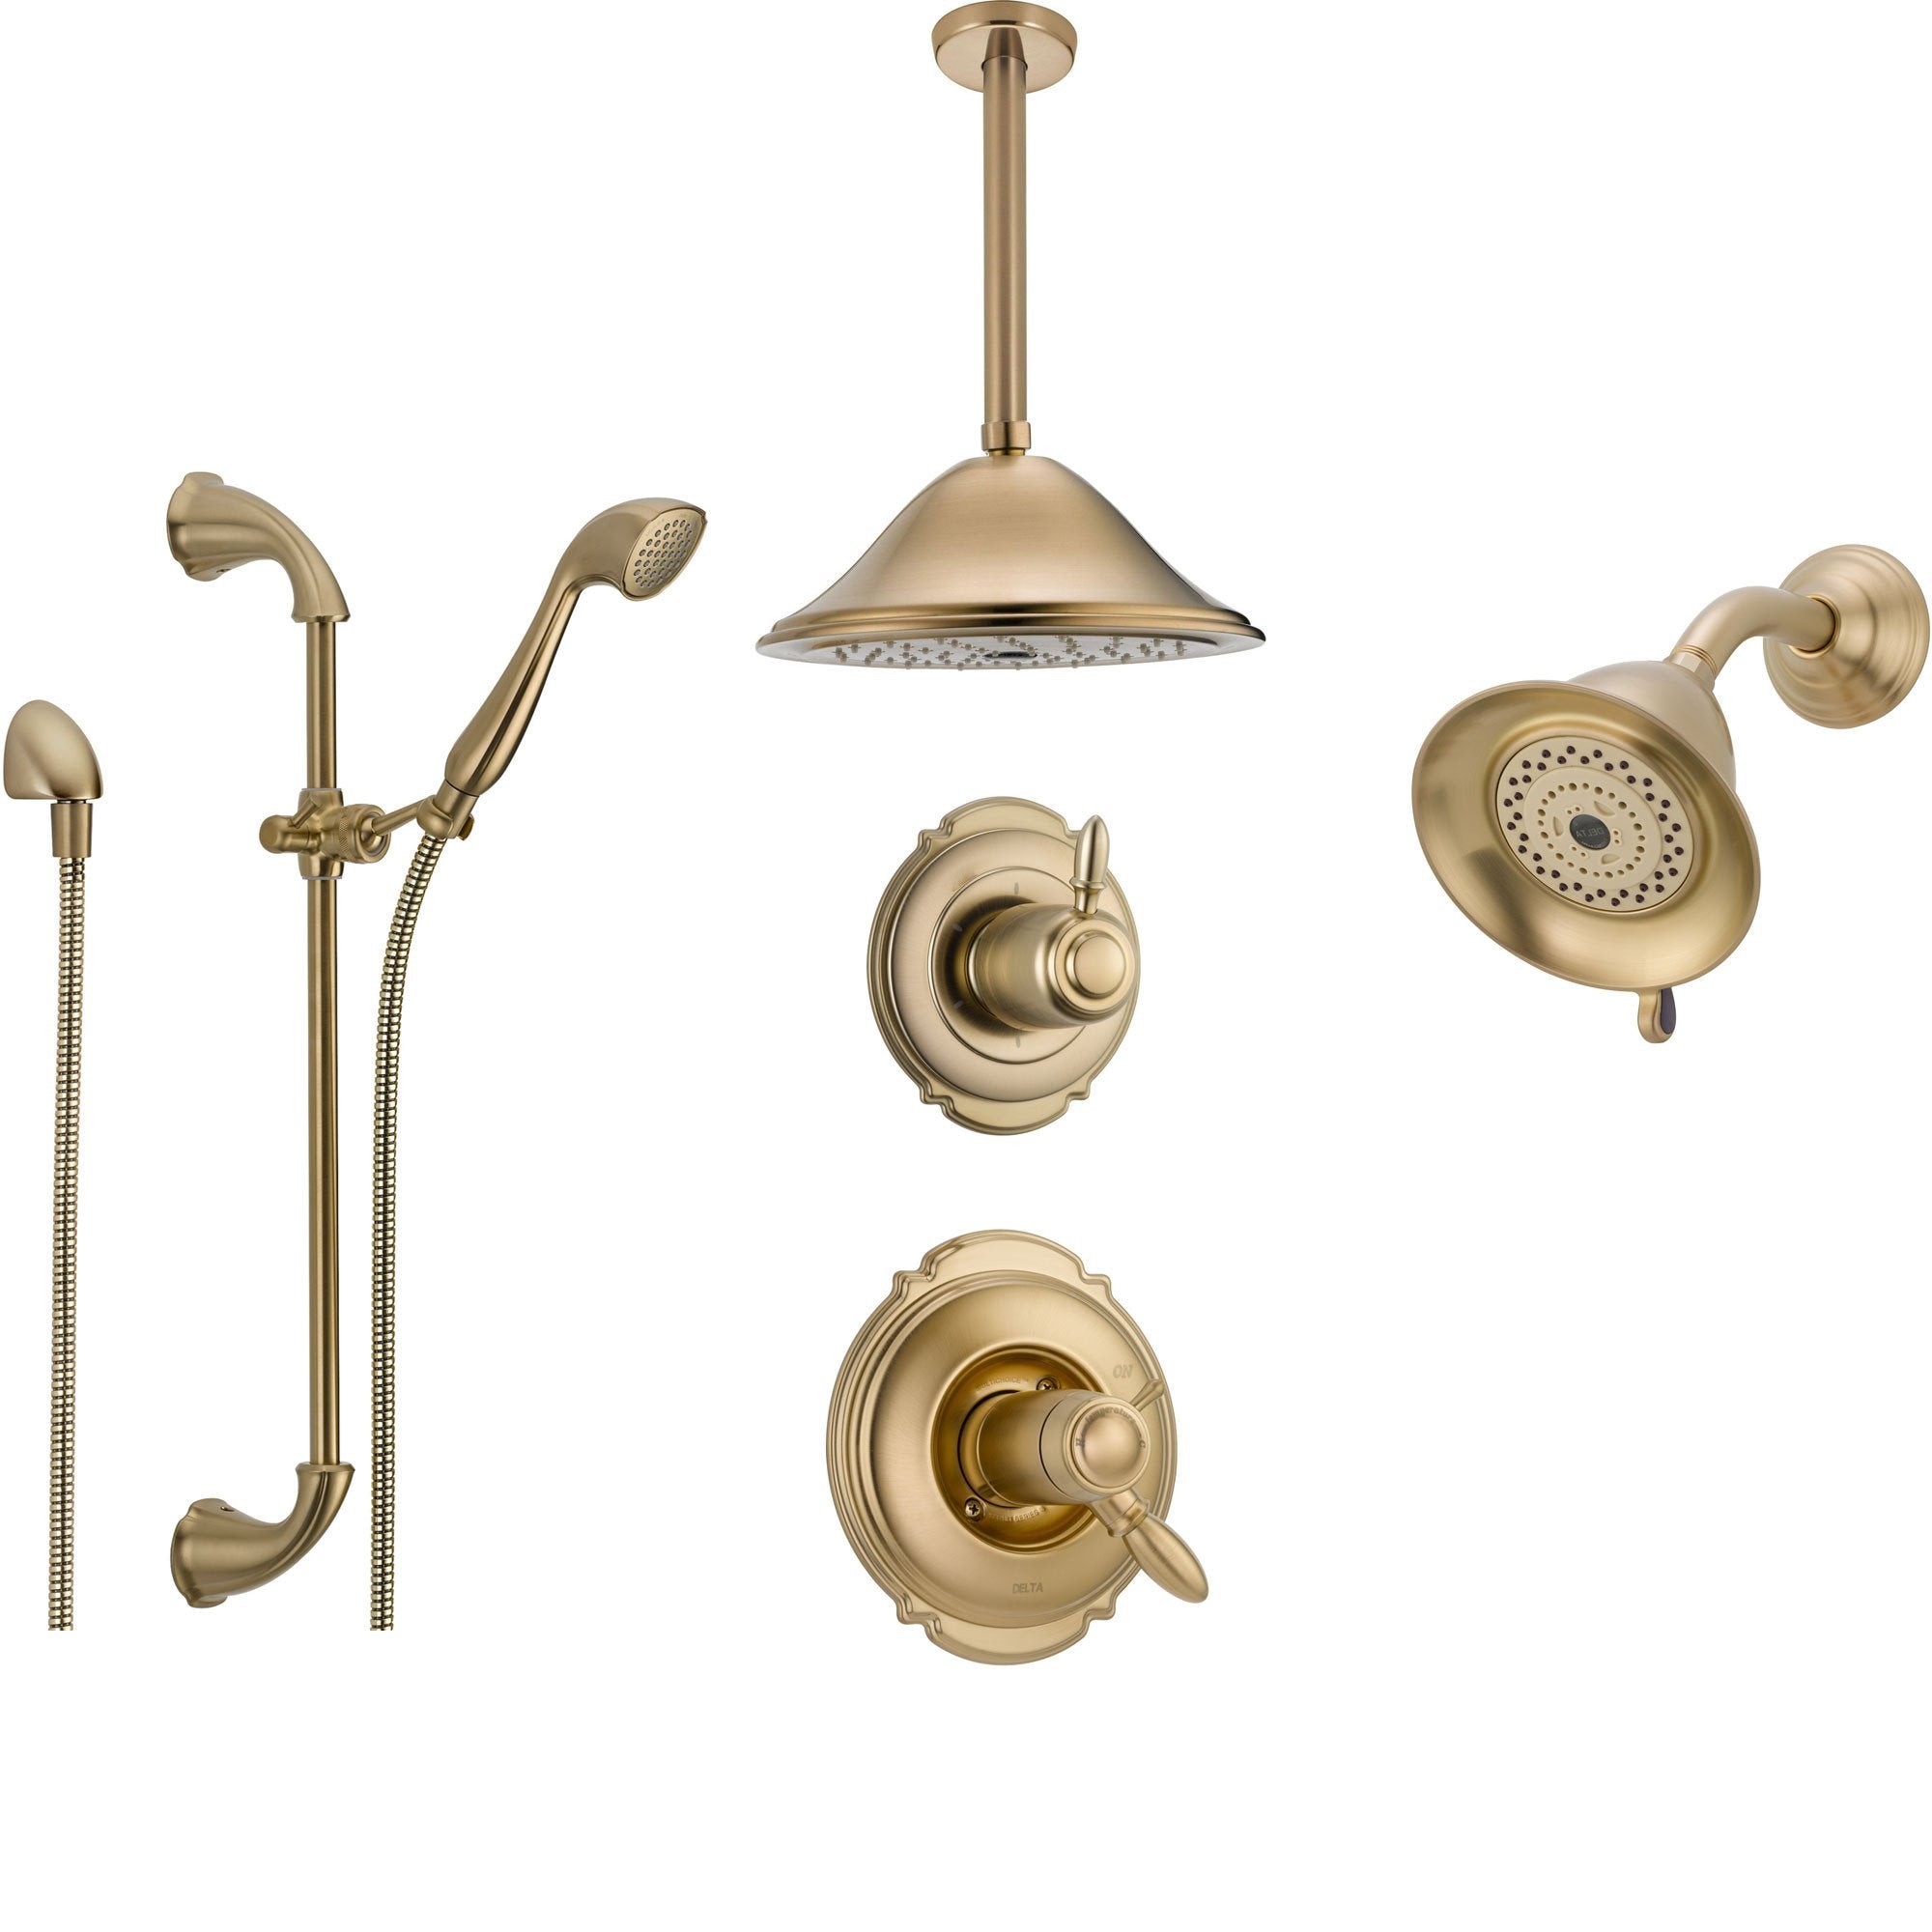 Delta Victorian Champagne Bronze Shower System with Thermostatic Shower Handle, 6-setting Diverter, Large Ceiling Mount Rain Showerhead, Handheld Shower, and Wall Mount Showerhead SS17T5594CZ